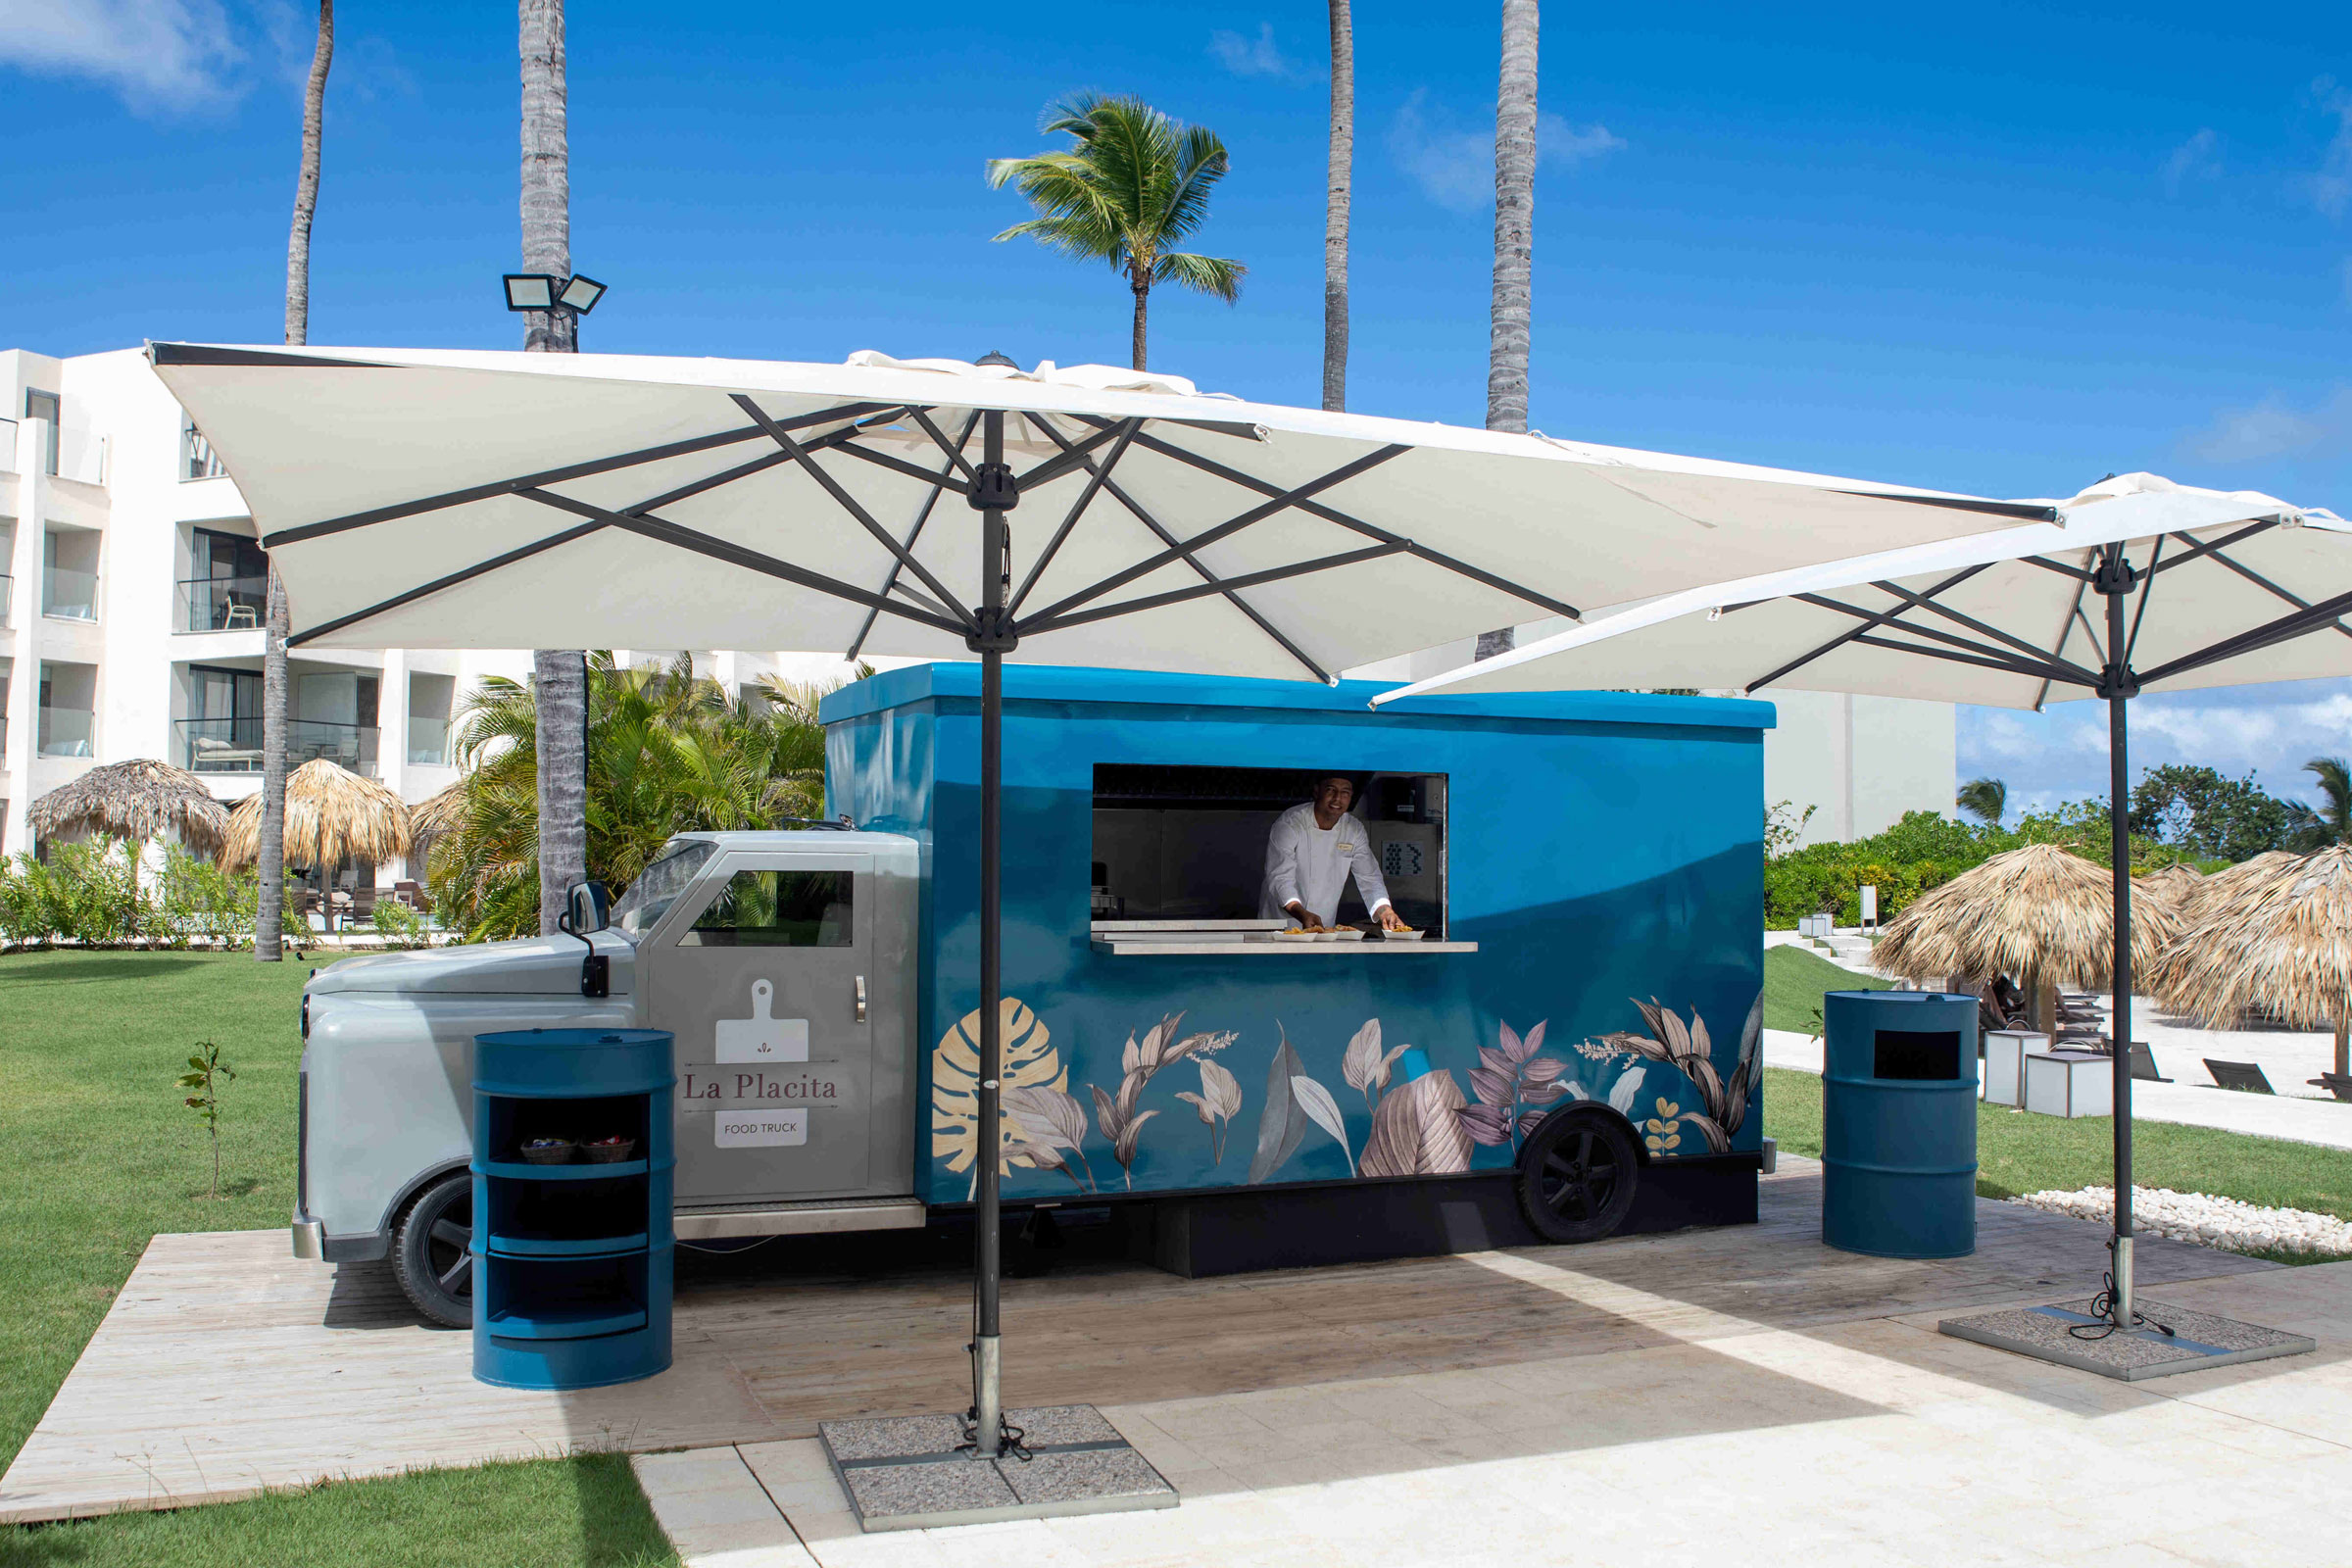 All Inclusive Resort in Punta Cana with a Food Truck for Mexican inspired cuisine